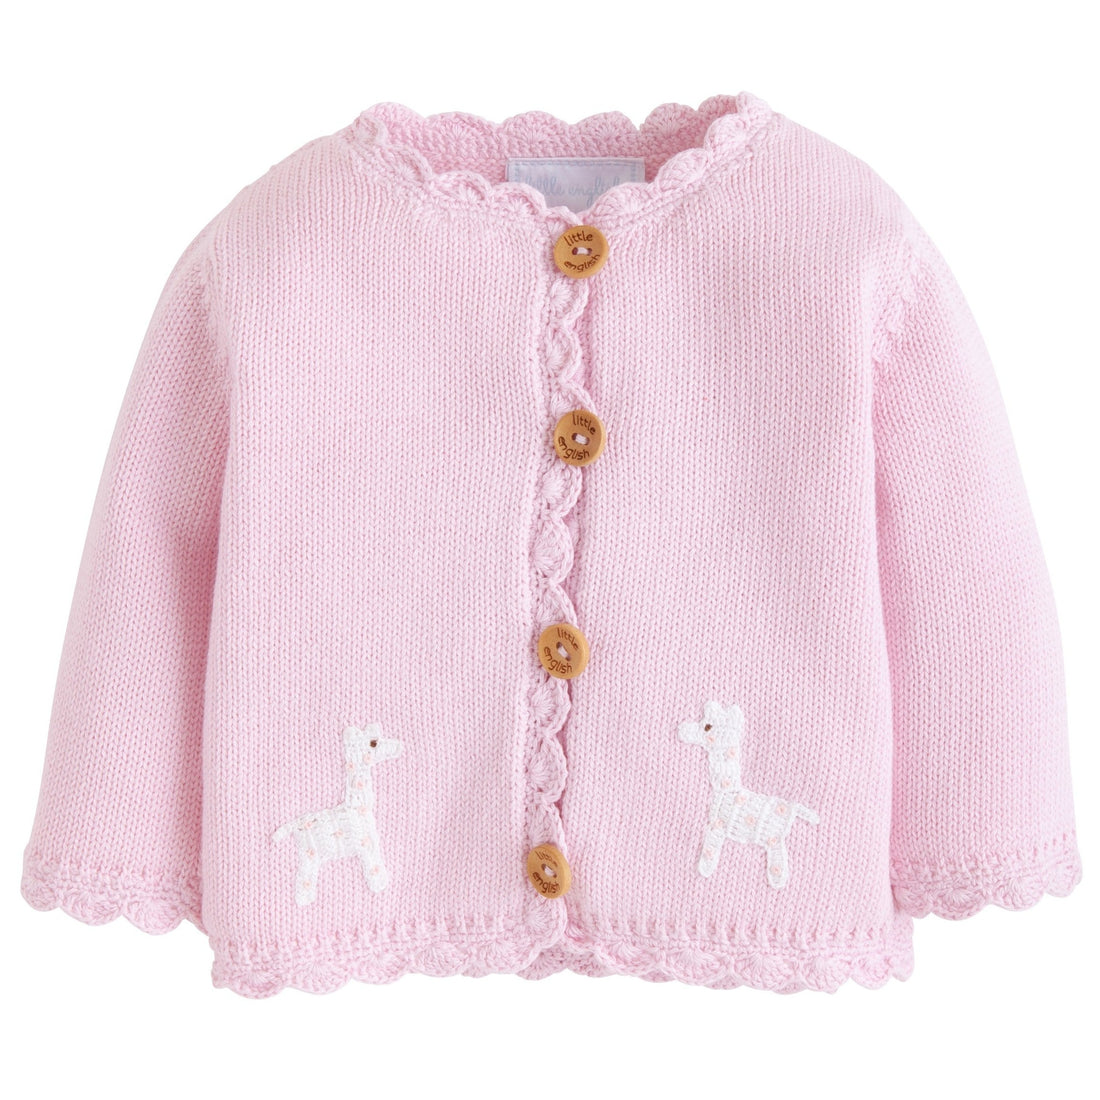 Little English traditional crochet sweater for baby, pink giraffe crochet sweater for baby girl